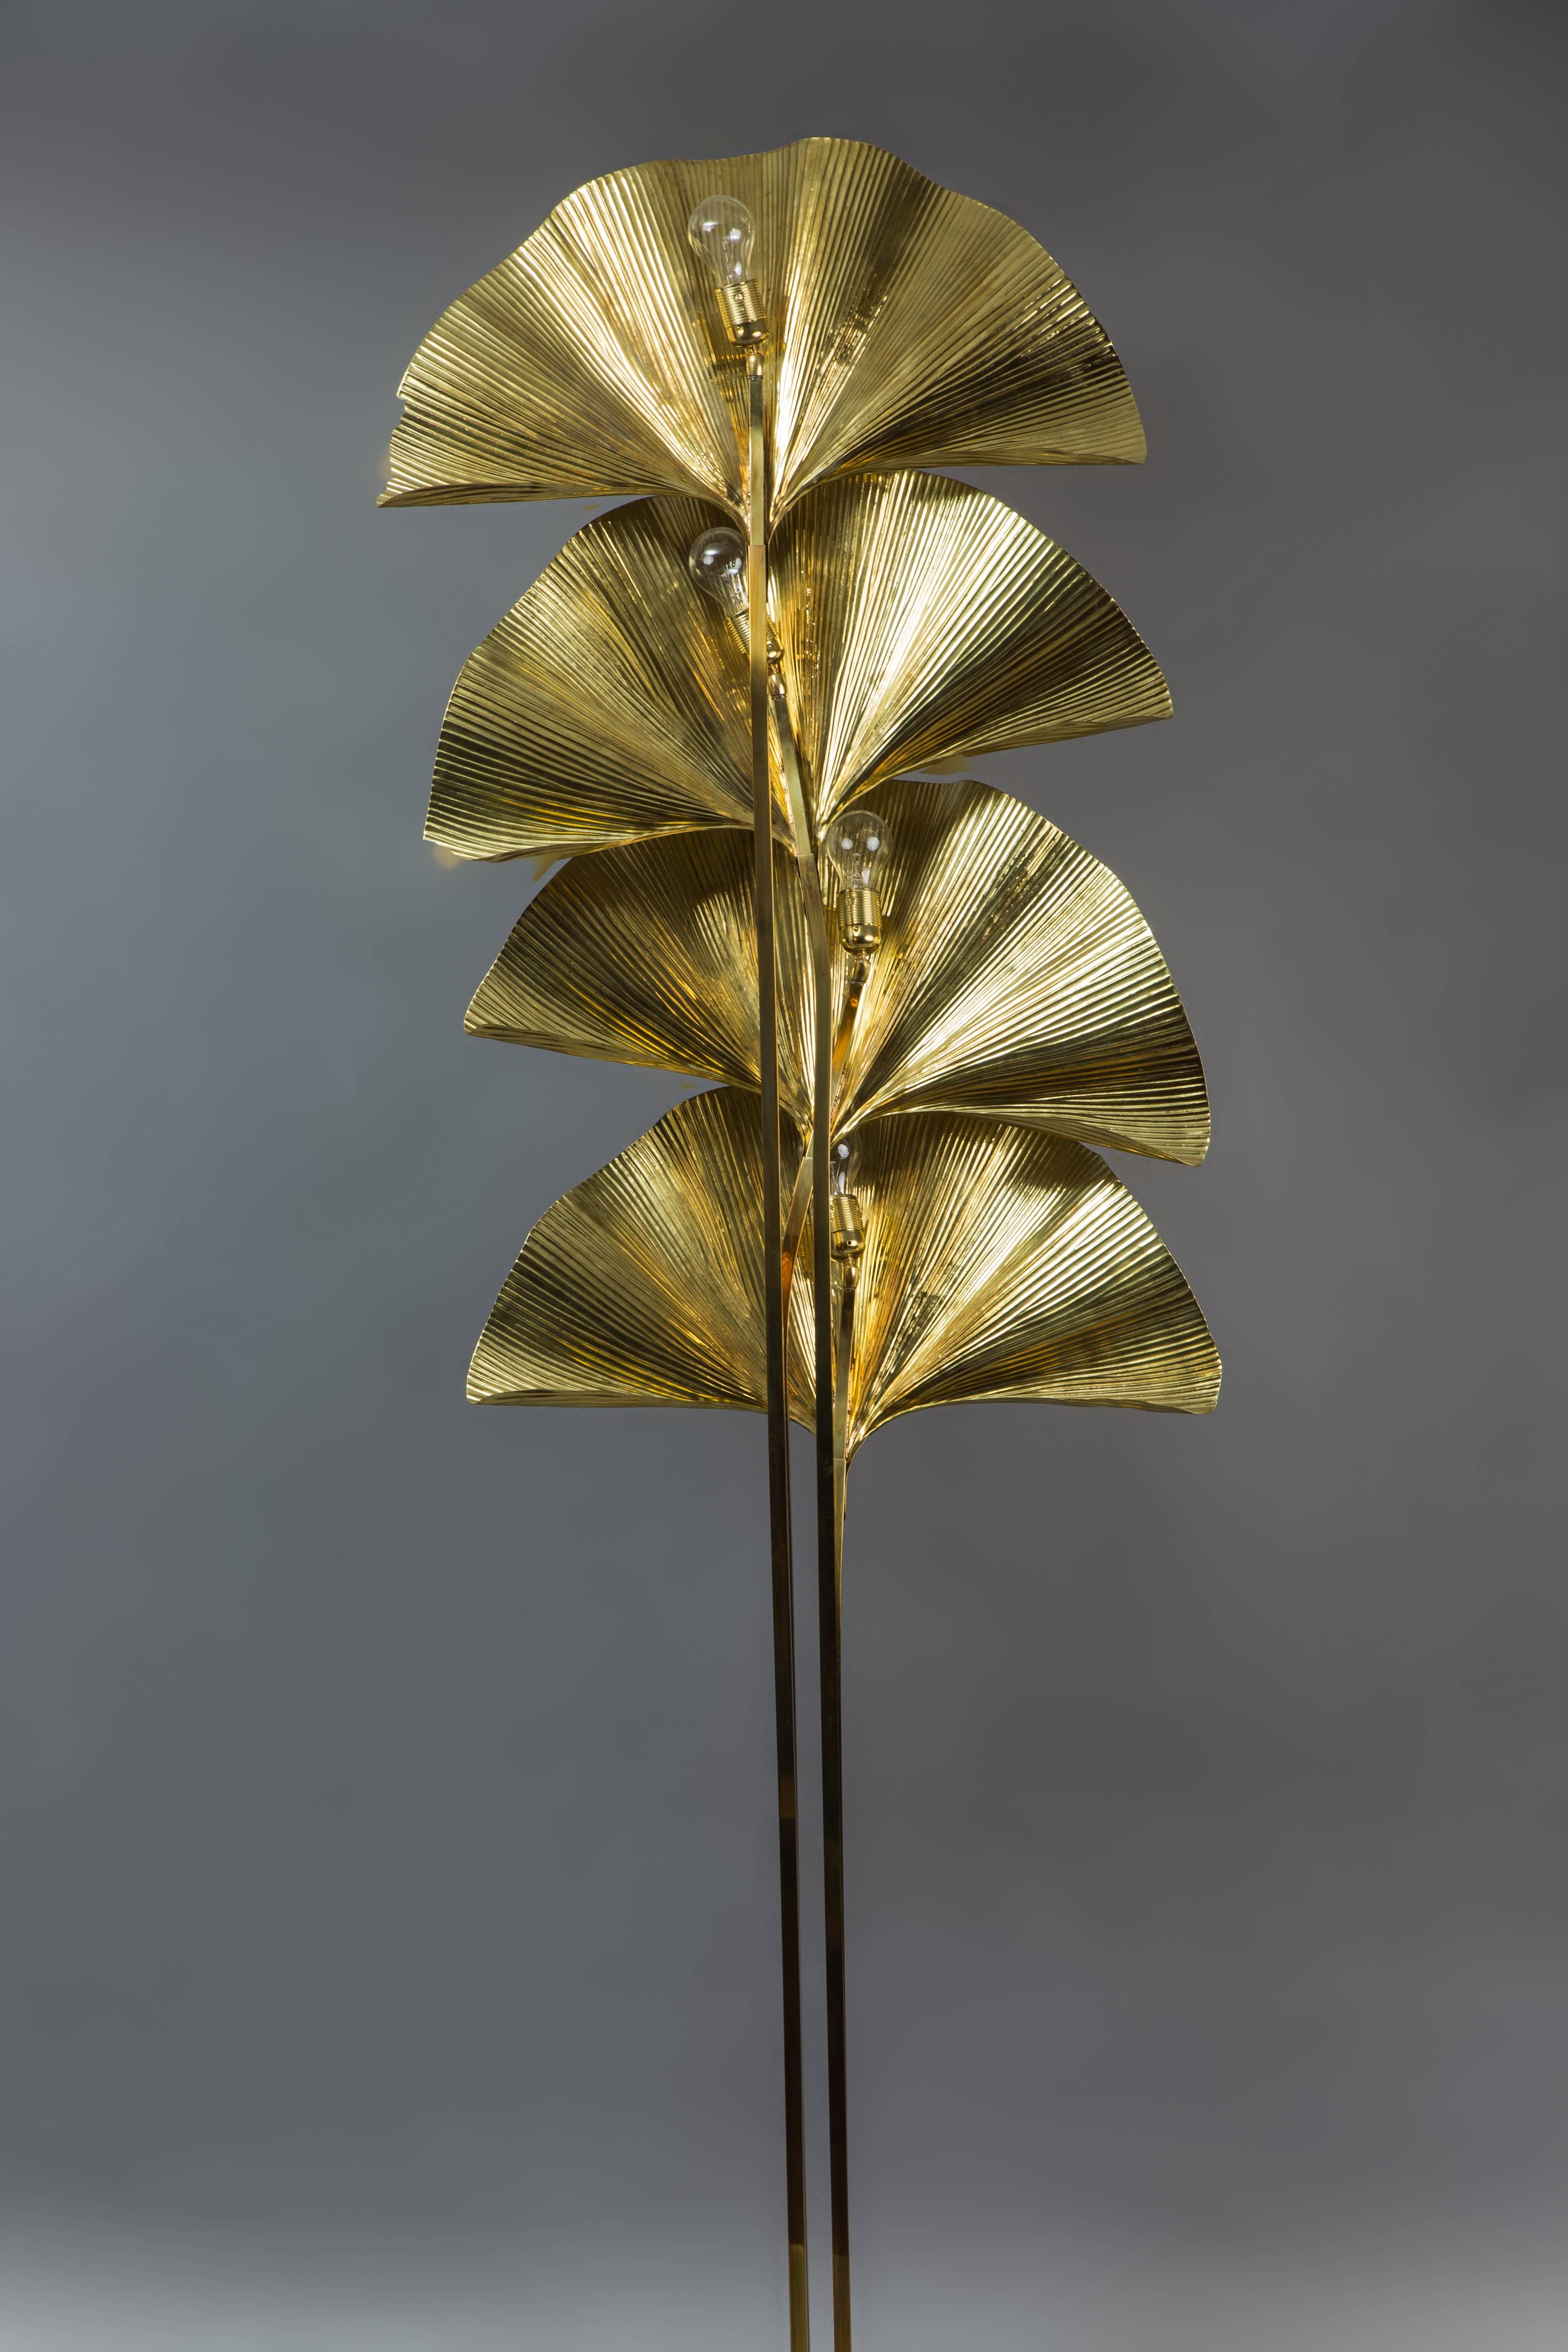 Large and elegant patinated gilt brass four-leaf ginkgo floor lamp with undulating embossed leaves, handmade using repoussé and chasing techniques, mounted on stems attached to square base, Italy, 1970s. 
Rewired to U.S. standards.

In 1970 Bottega